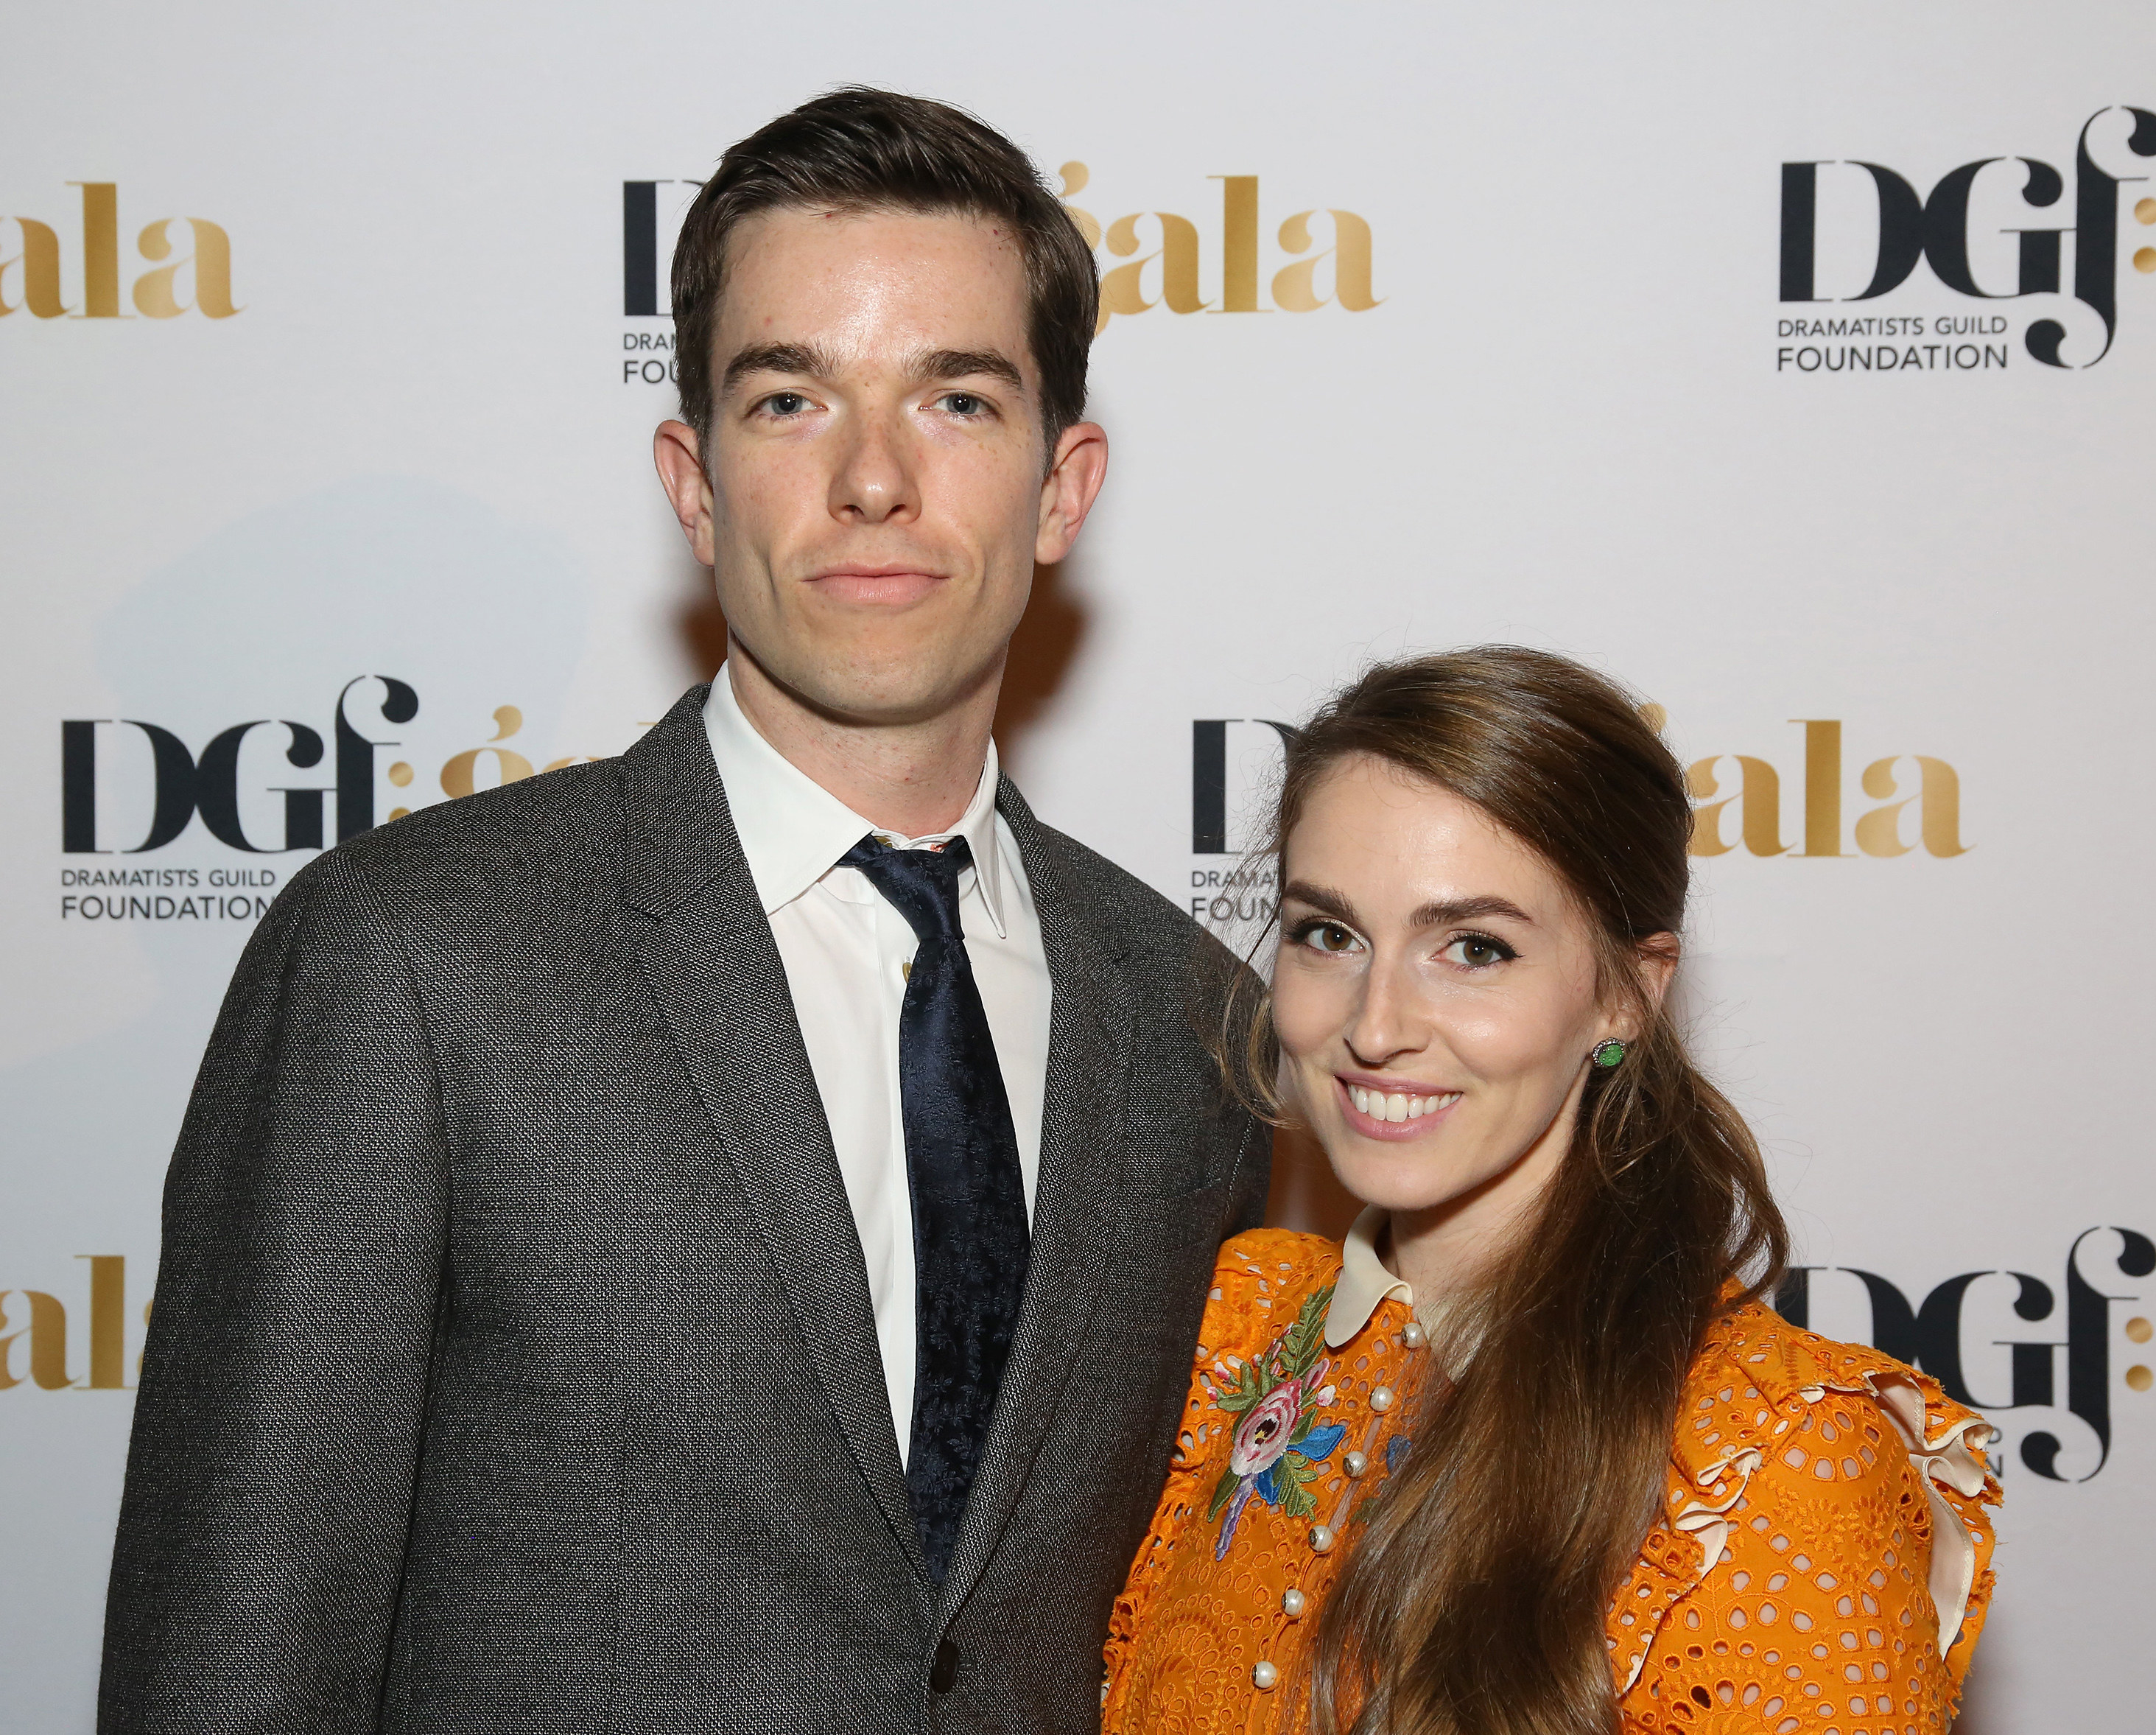 Close-up of John and Anna at a media event